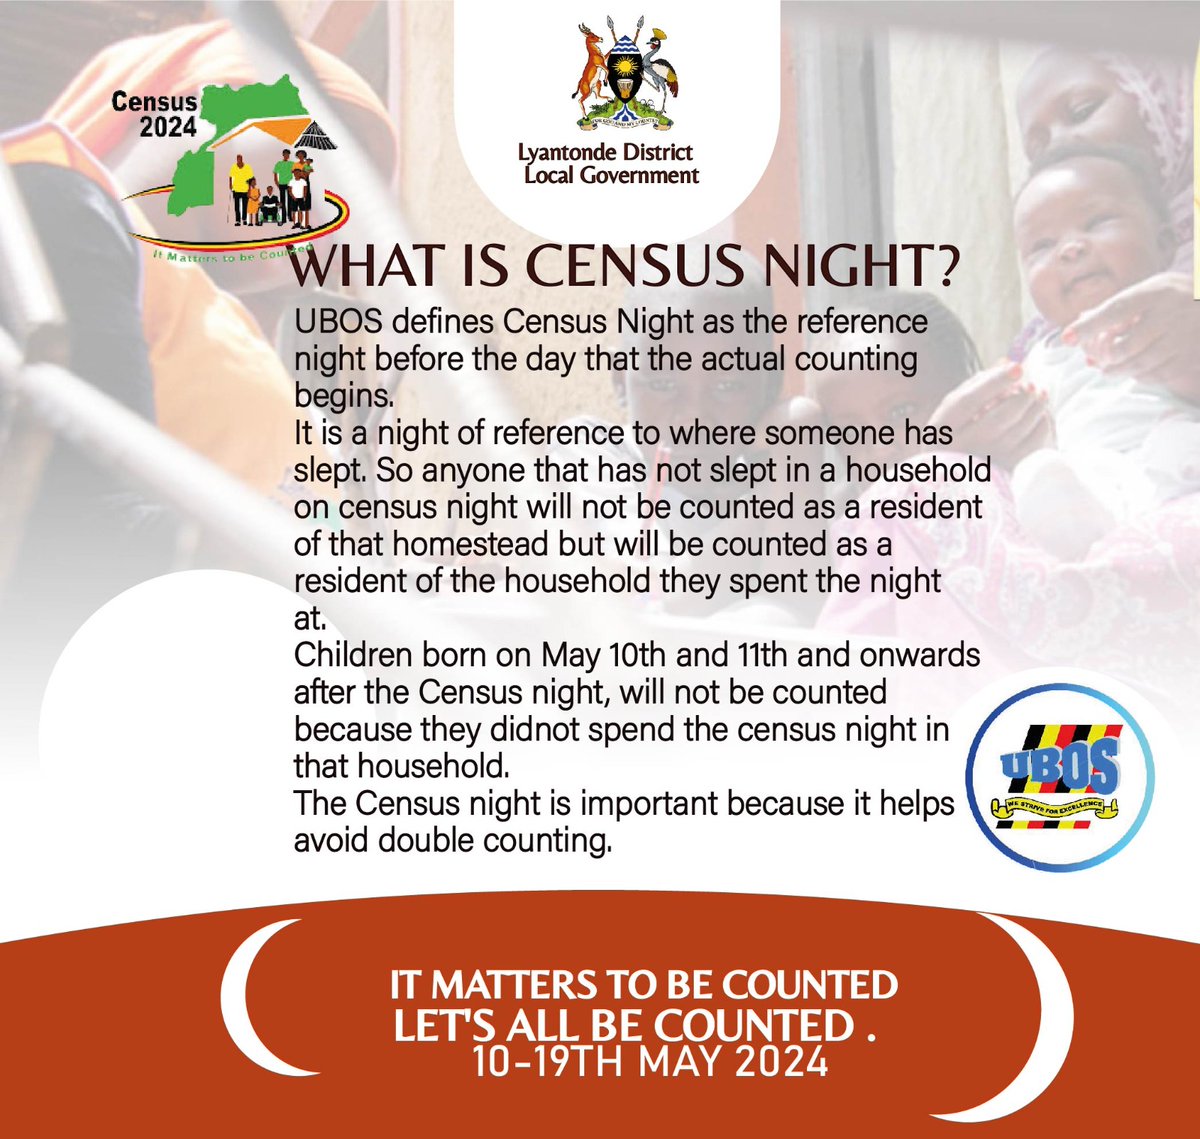 A few hours to census night we labour to explain what this night means. #itmatrerstocounted #Census2024 #censusnight